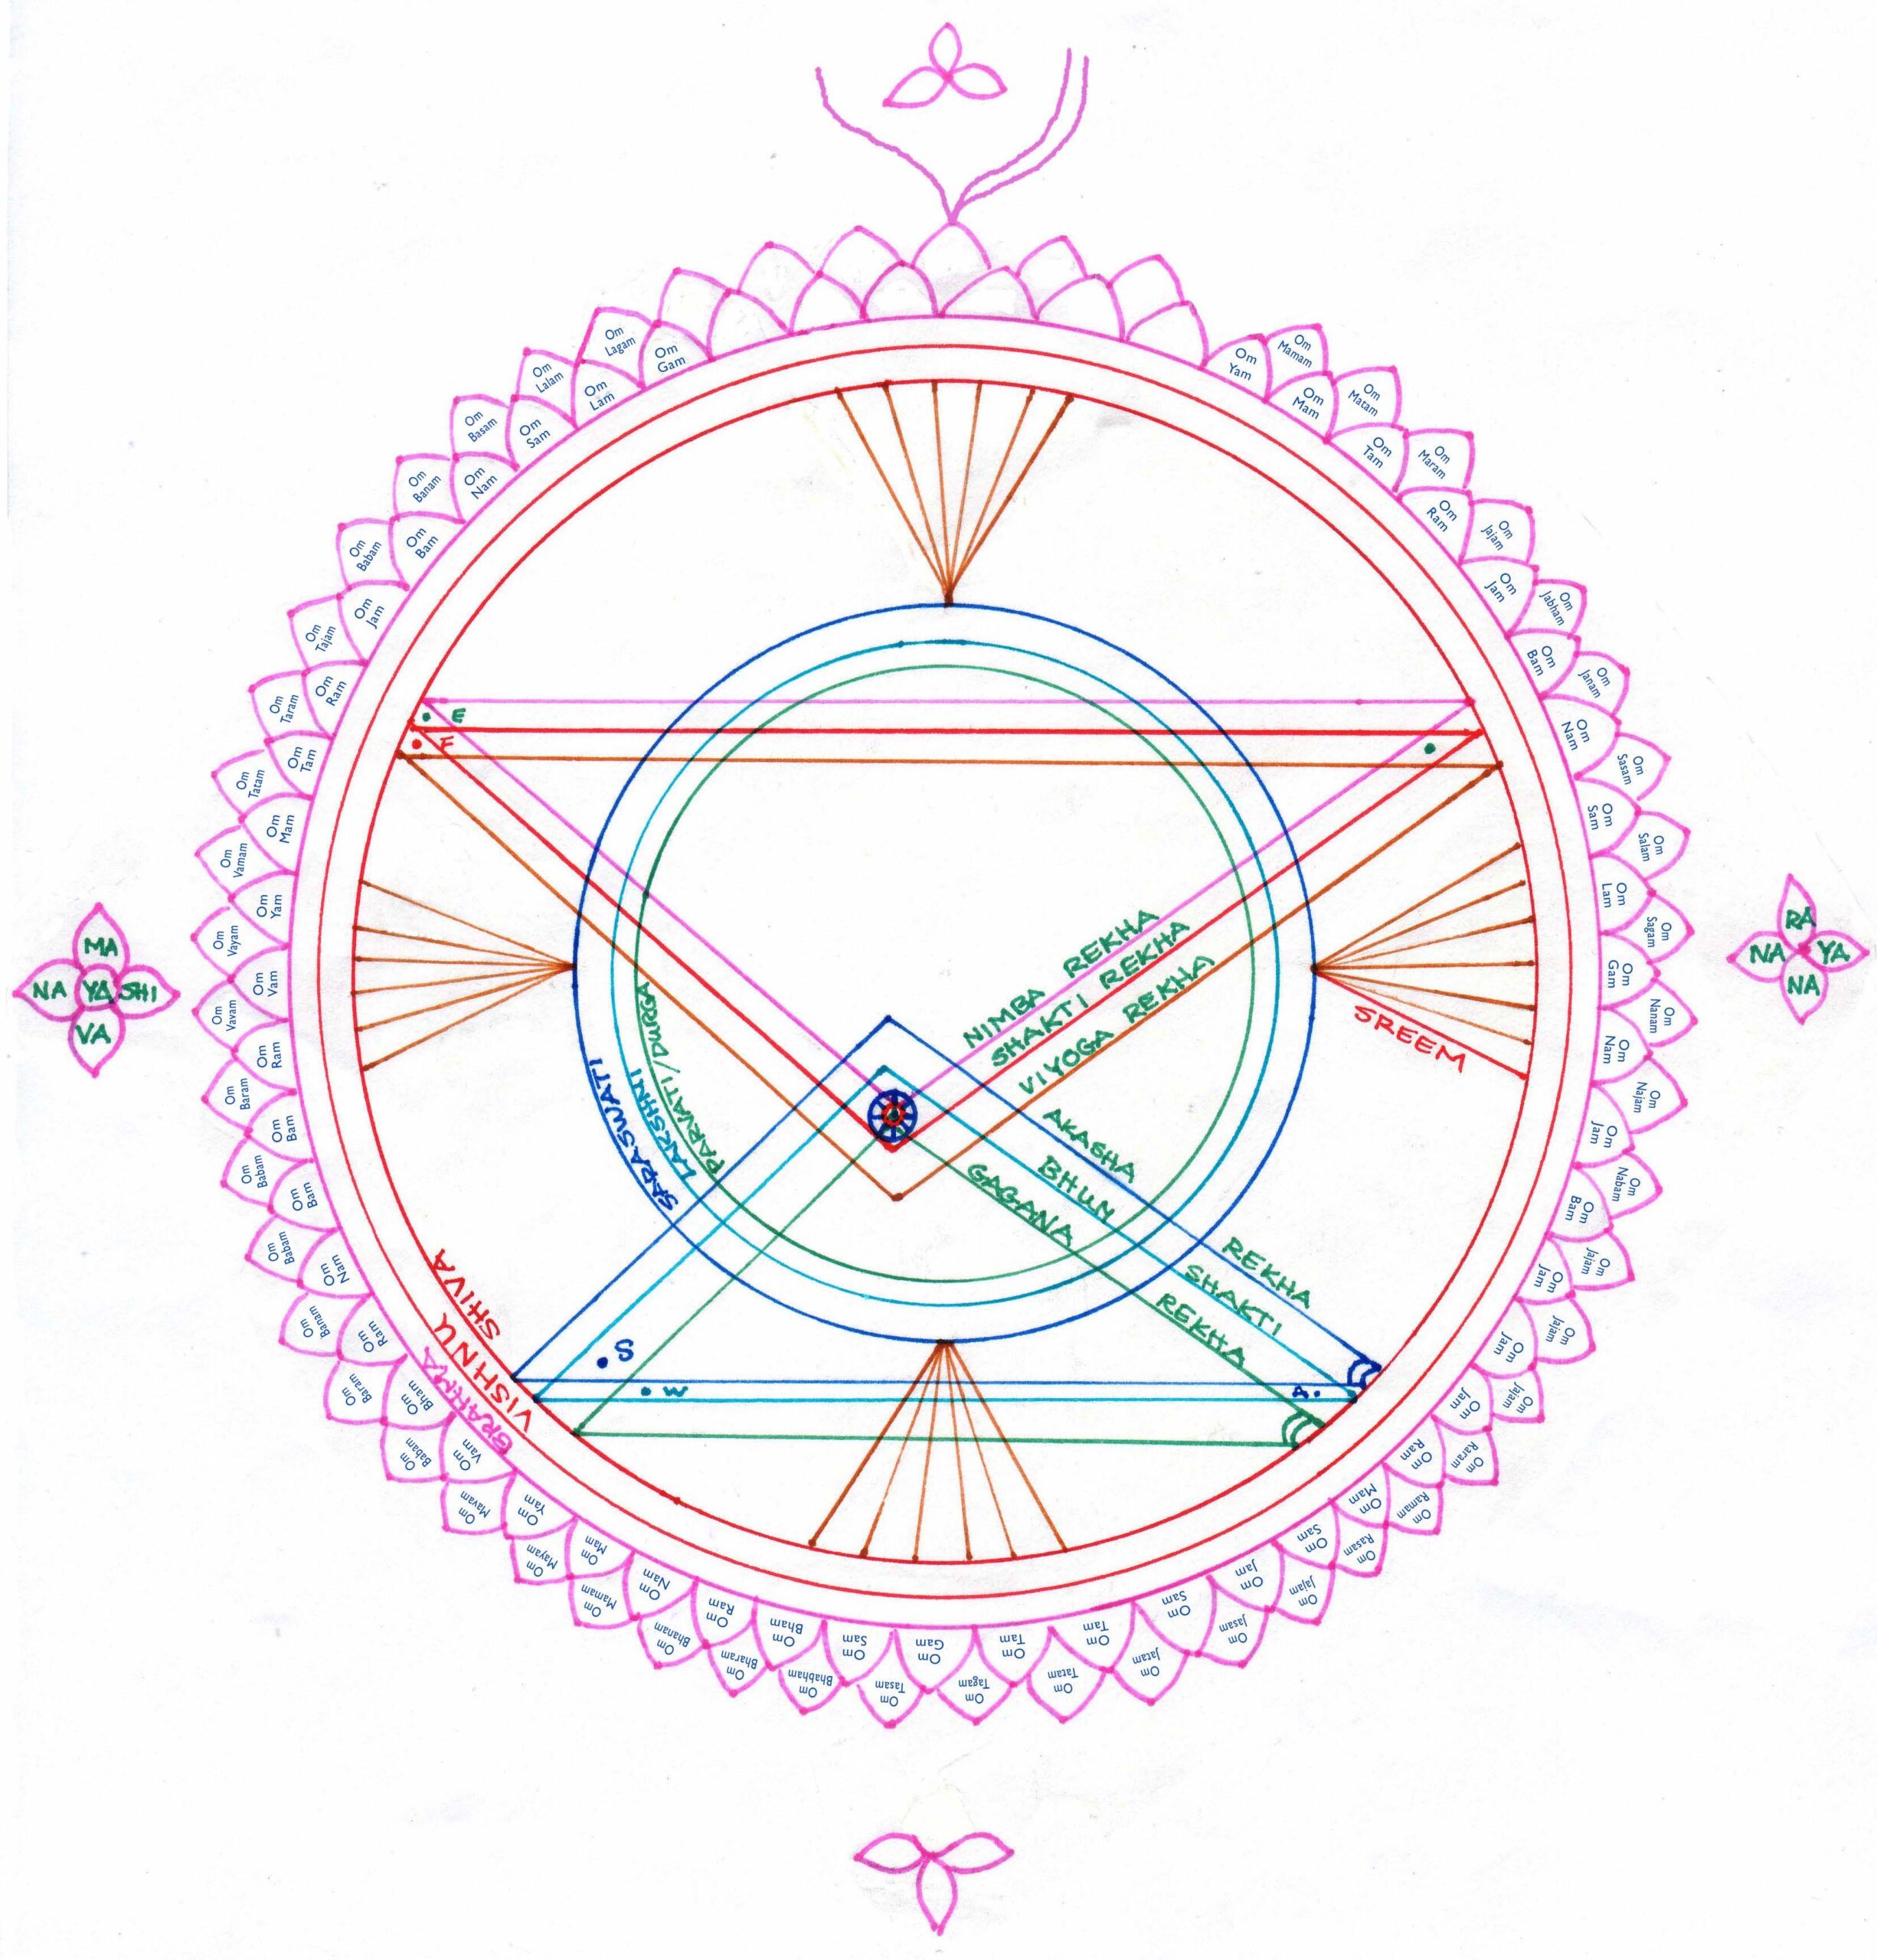 The Sri Chakra – The Divine Mother’s Womb